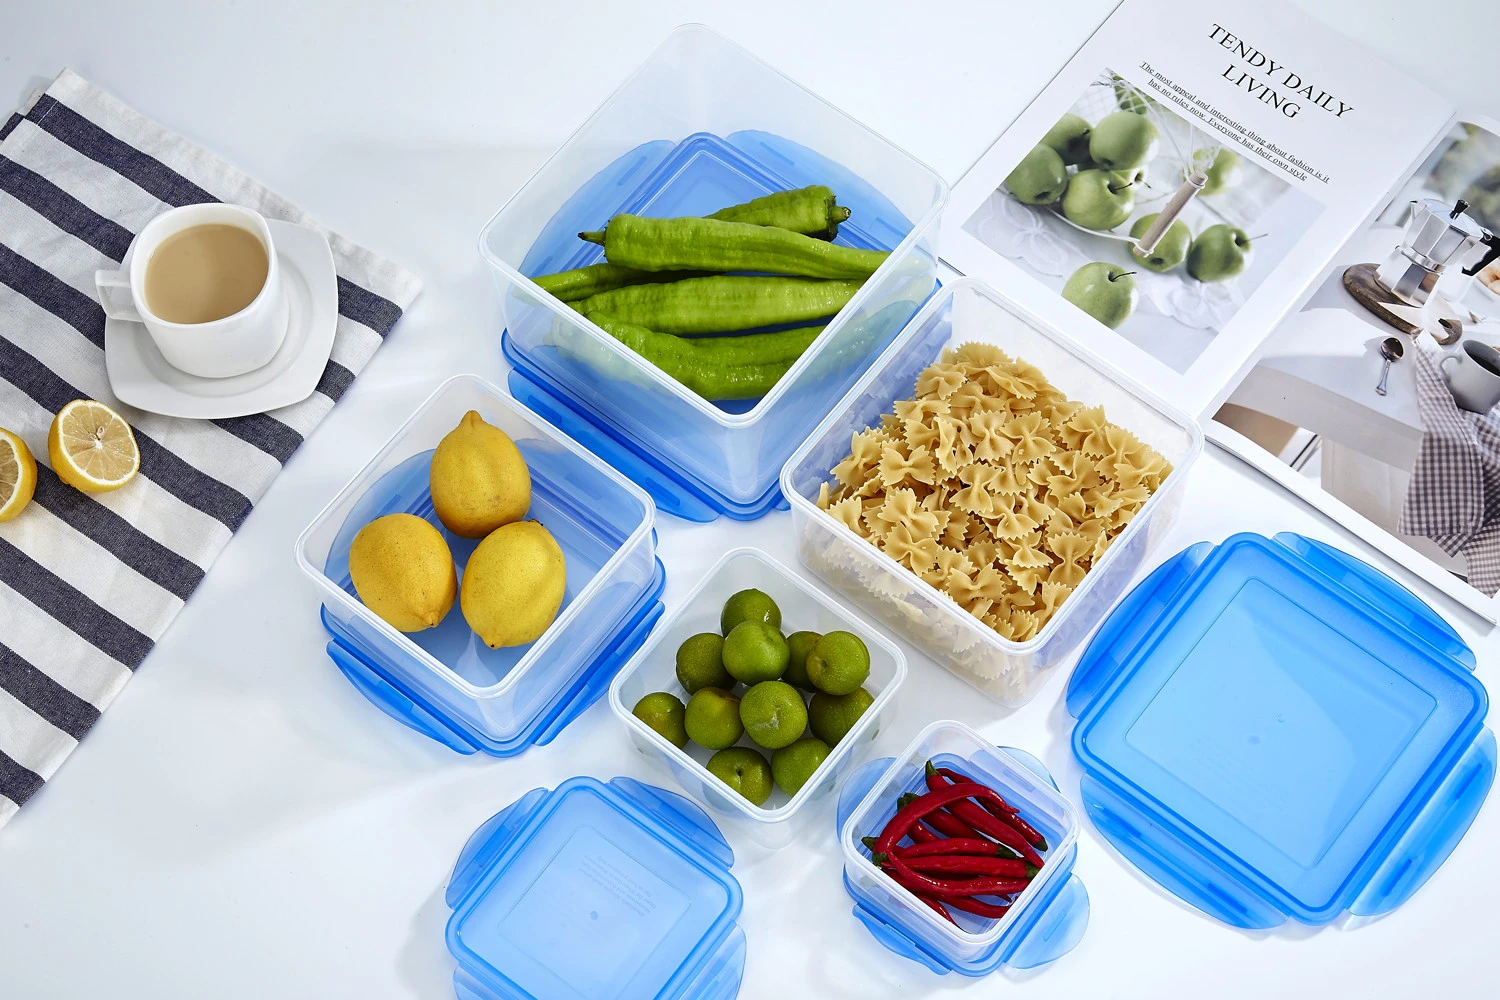 Clip Lock Food Container 1500ml Square Plastic Food Container BPA Free Airtight Food Storage Box